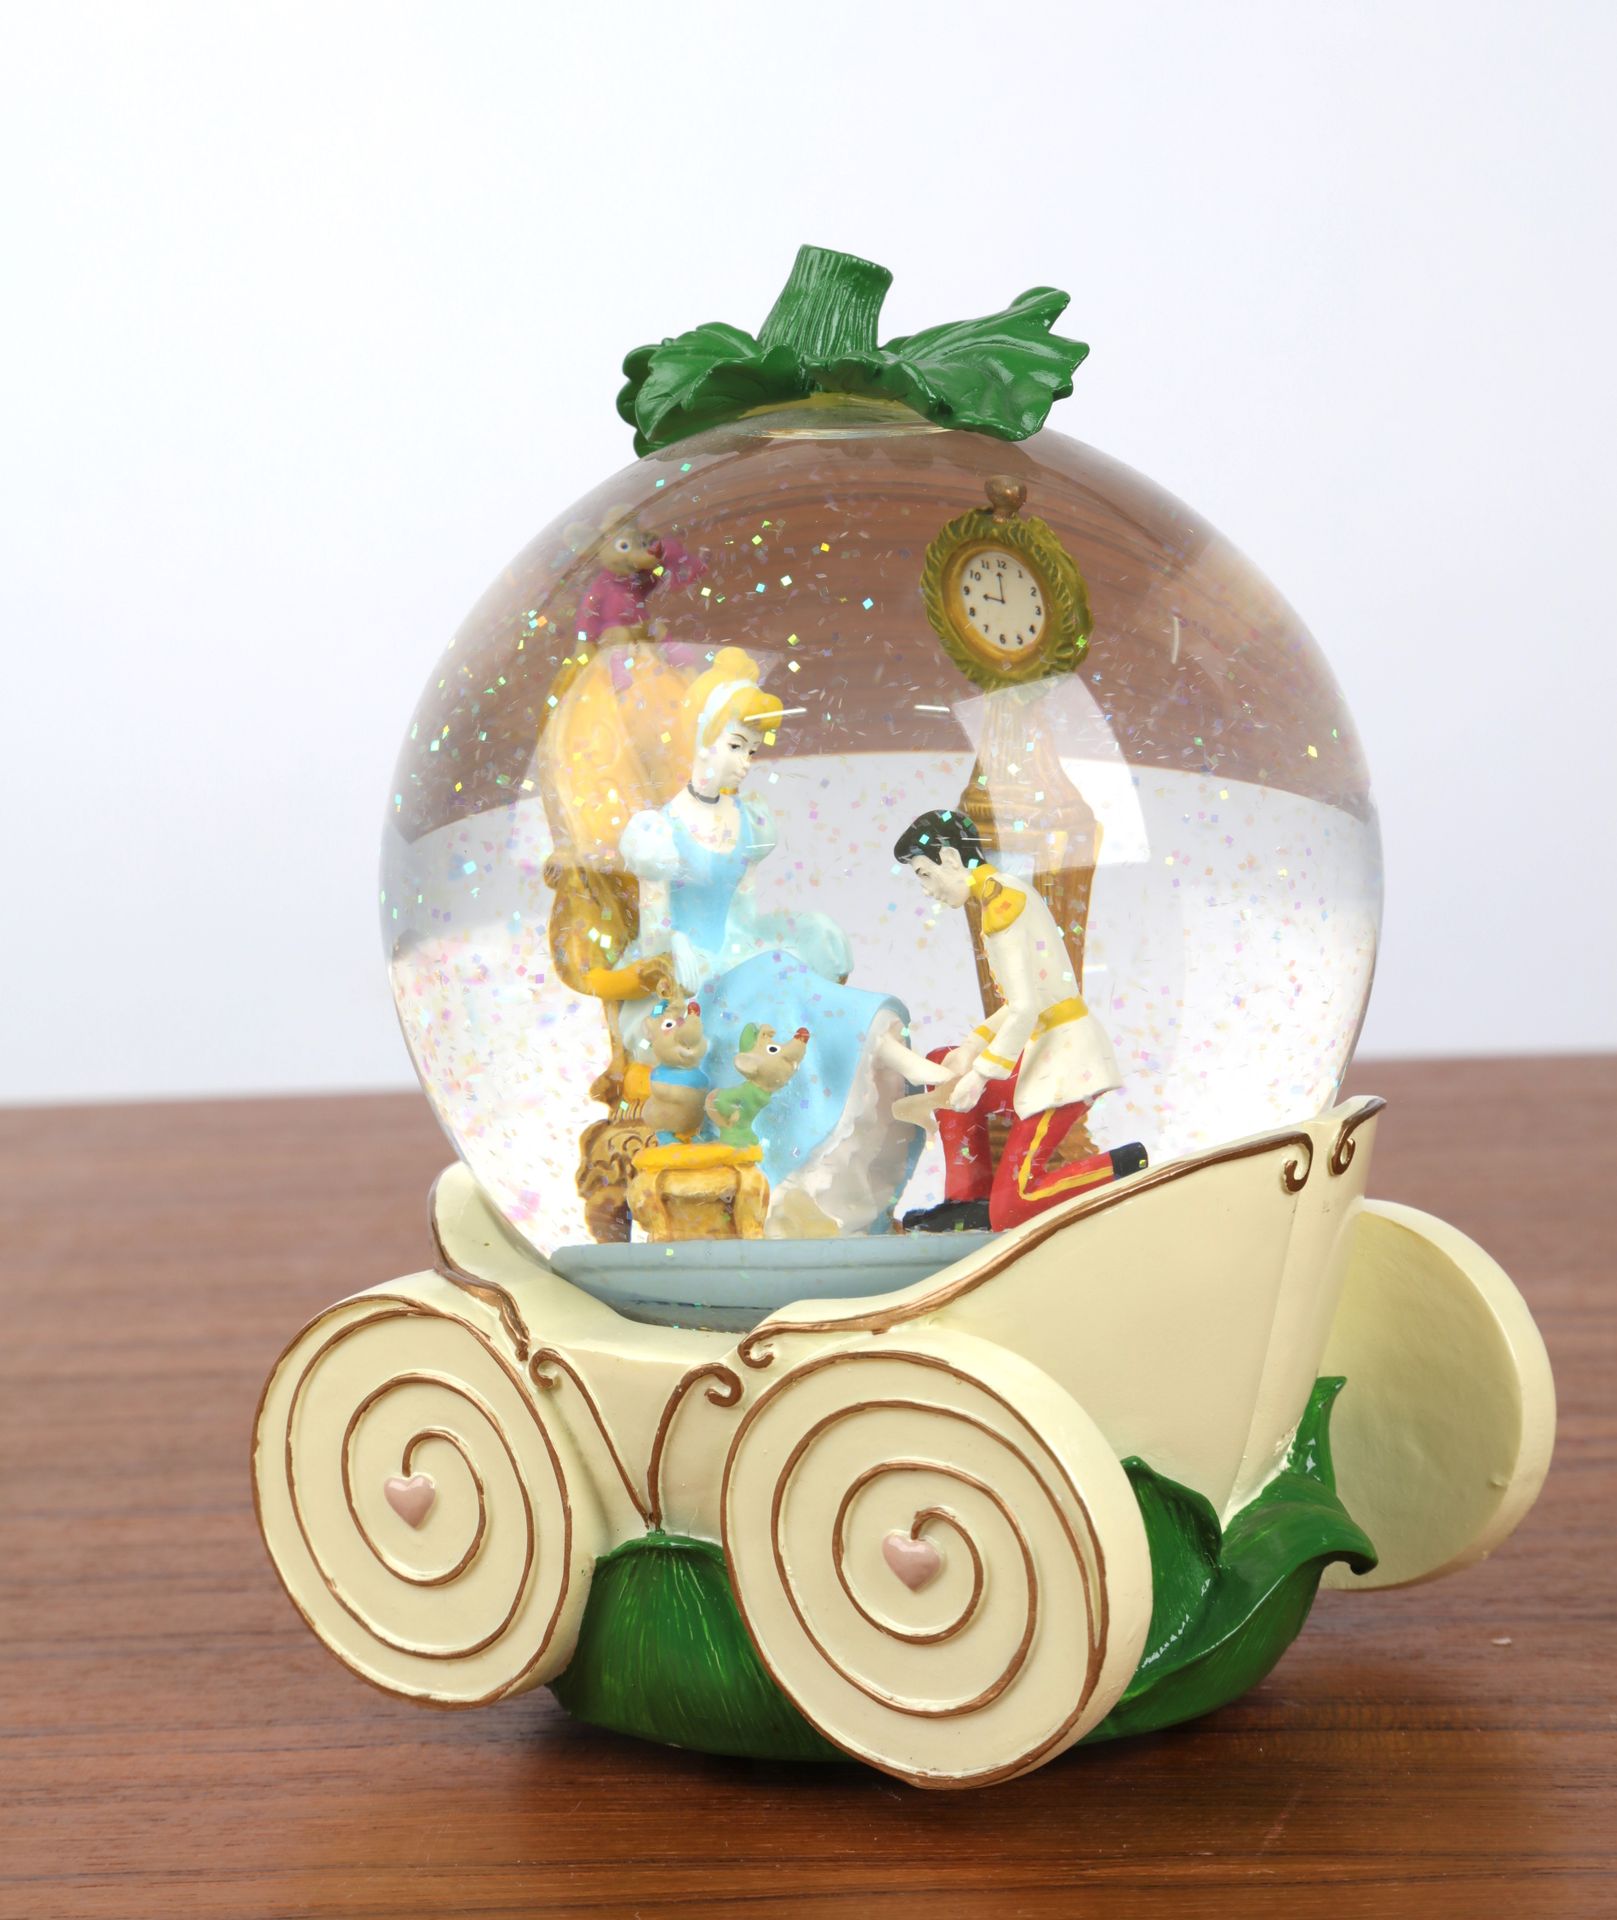 Null "Christmas bauble", and music box with Cinderella decoration. 16x12cm.